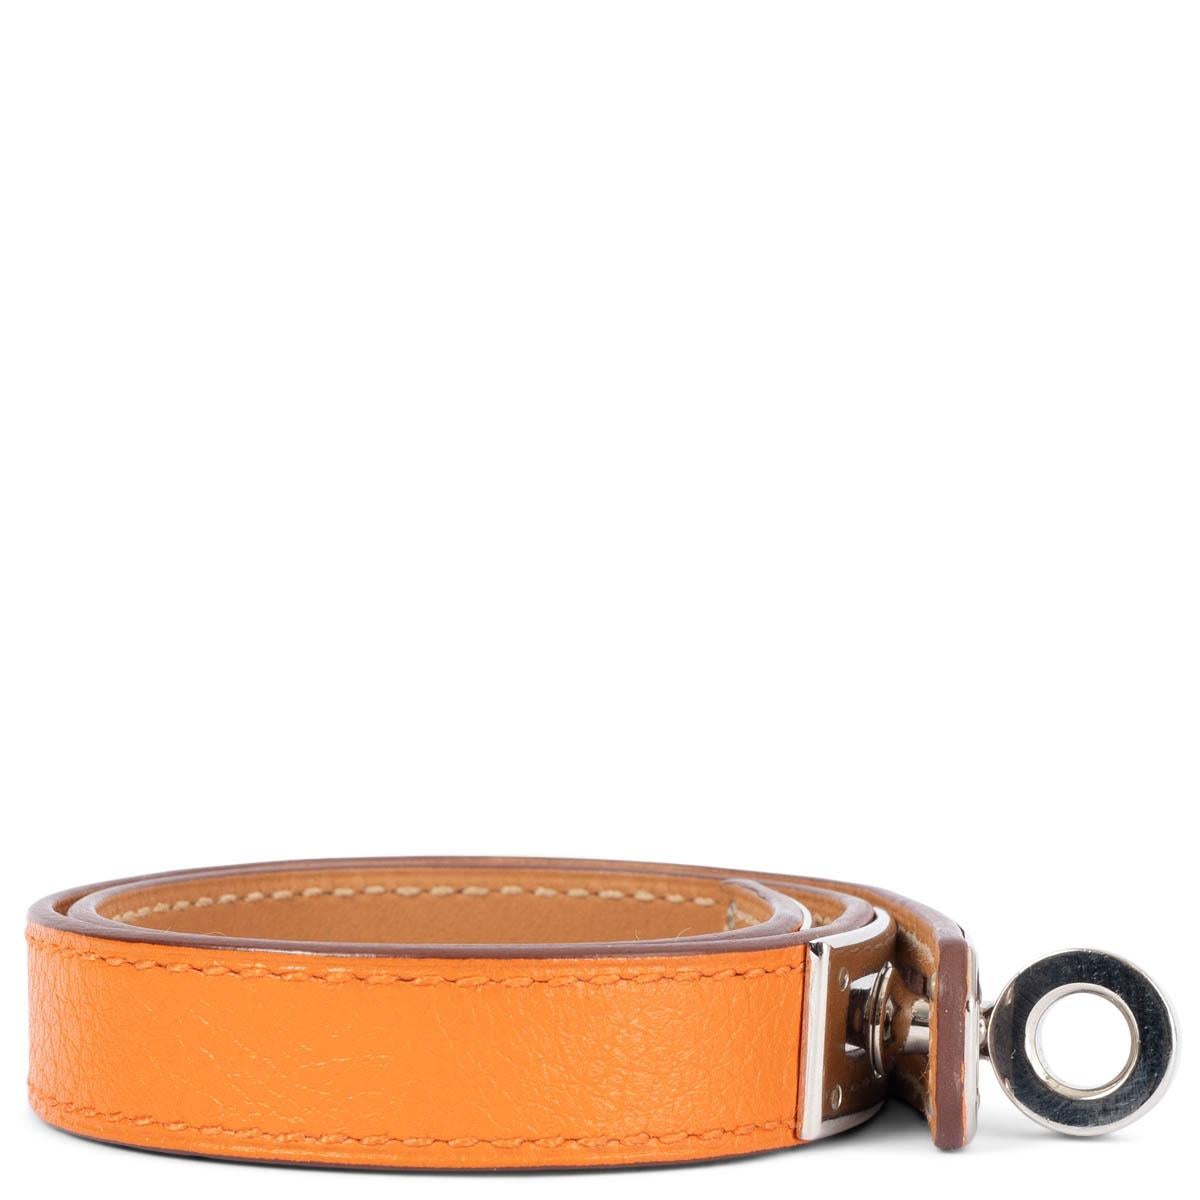 100% authentic Hermès Kelly Double Tour wrap bracelet in orange Swift leather with palladium plated Kelly closure. Has been worn and is in excellent condition. Comes with box. 

Measurements
Tag Size	S
Size	S
Width	1.3cm (0.5in)
Length	37cm